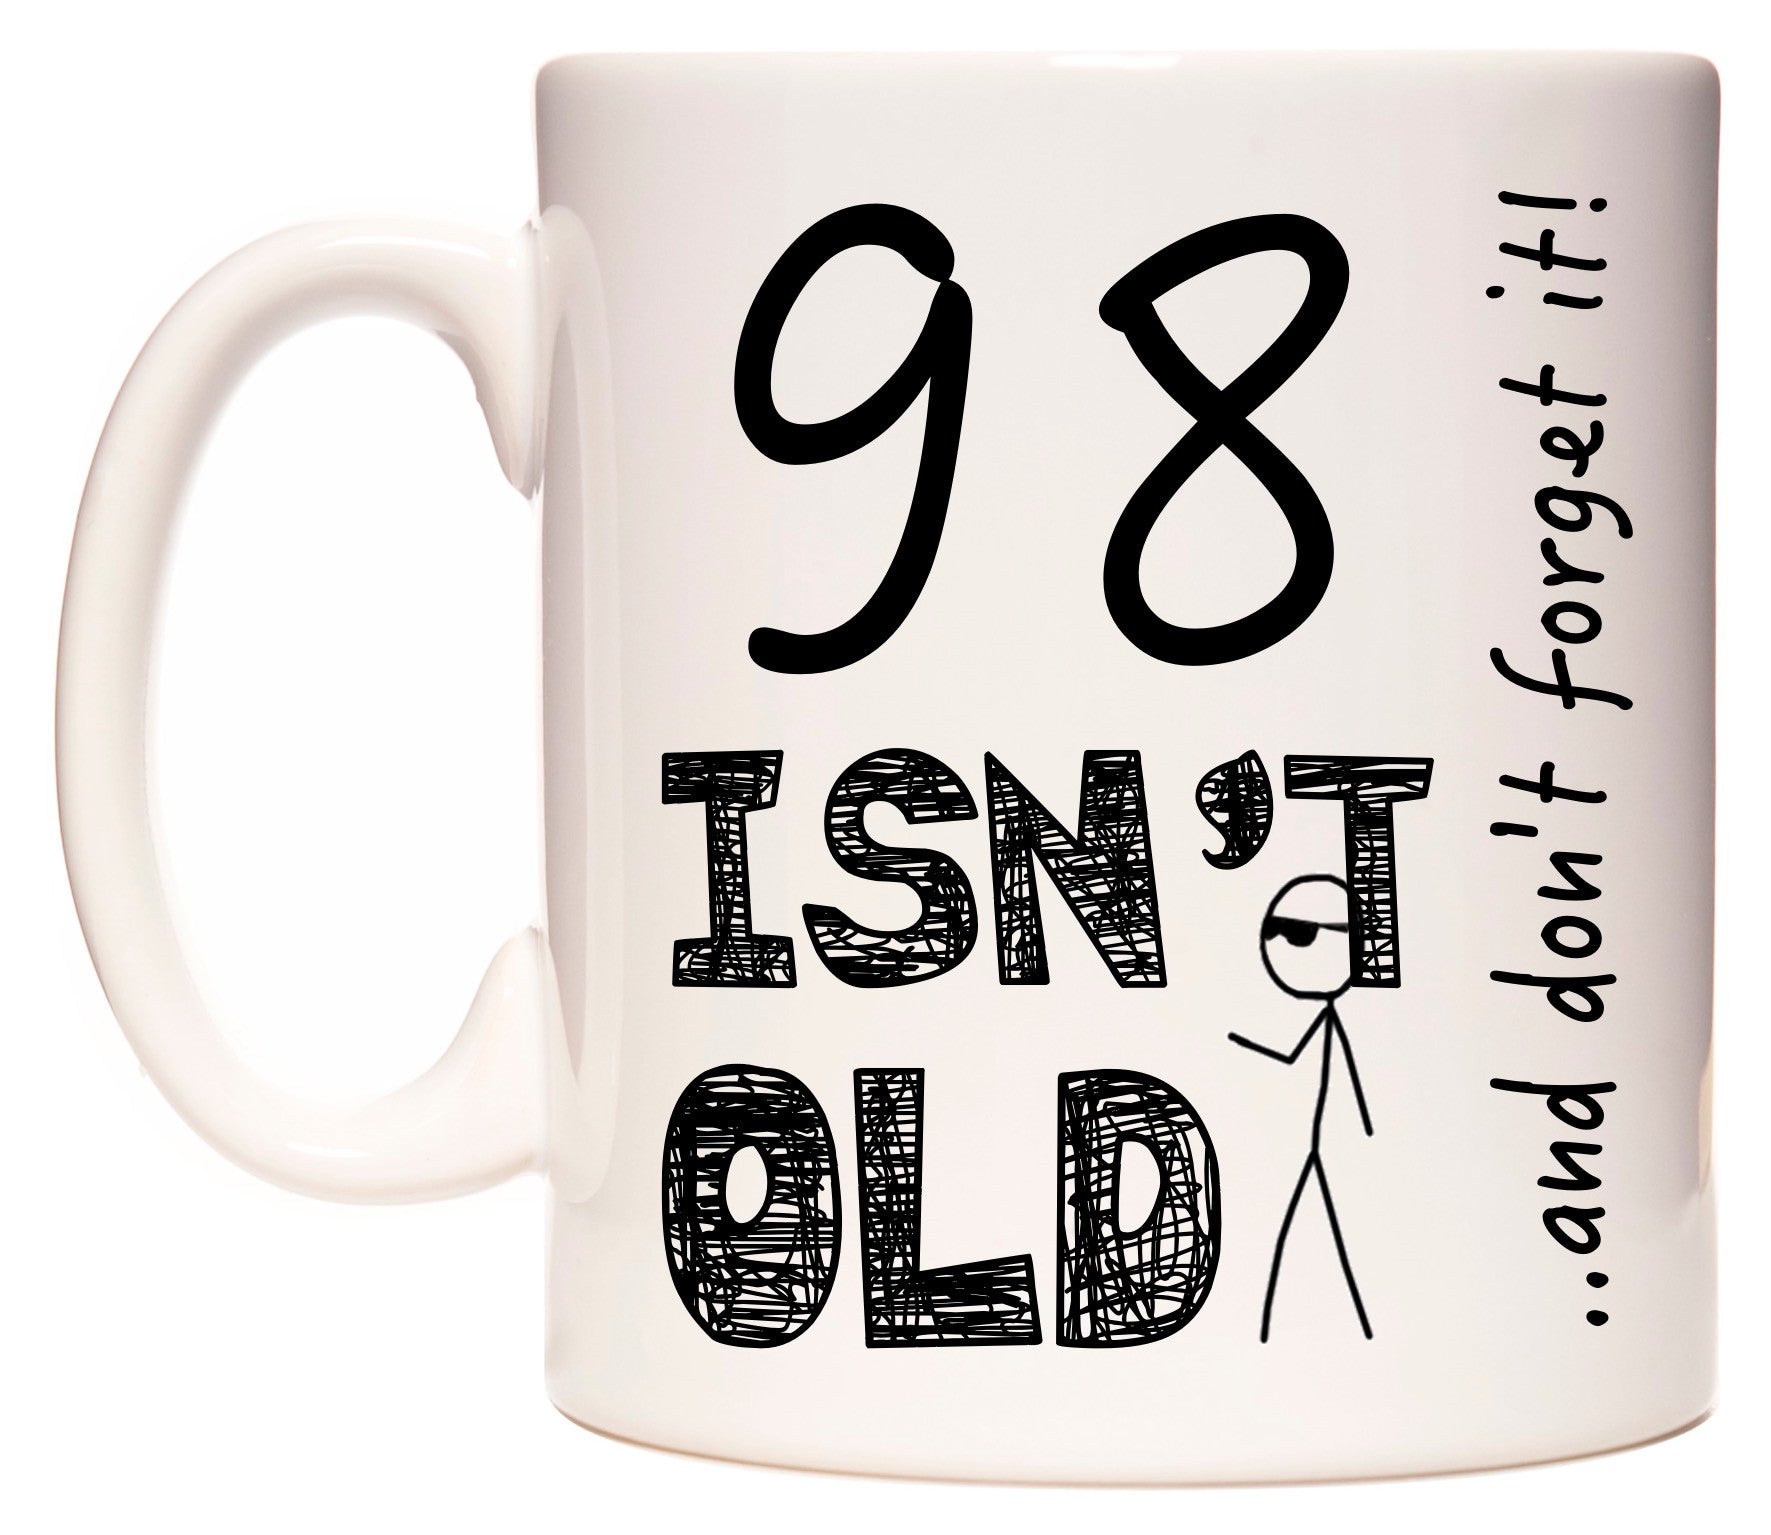 This mug features 98 Isn't Old